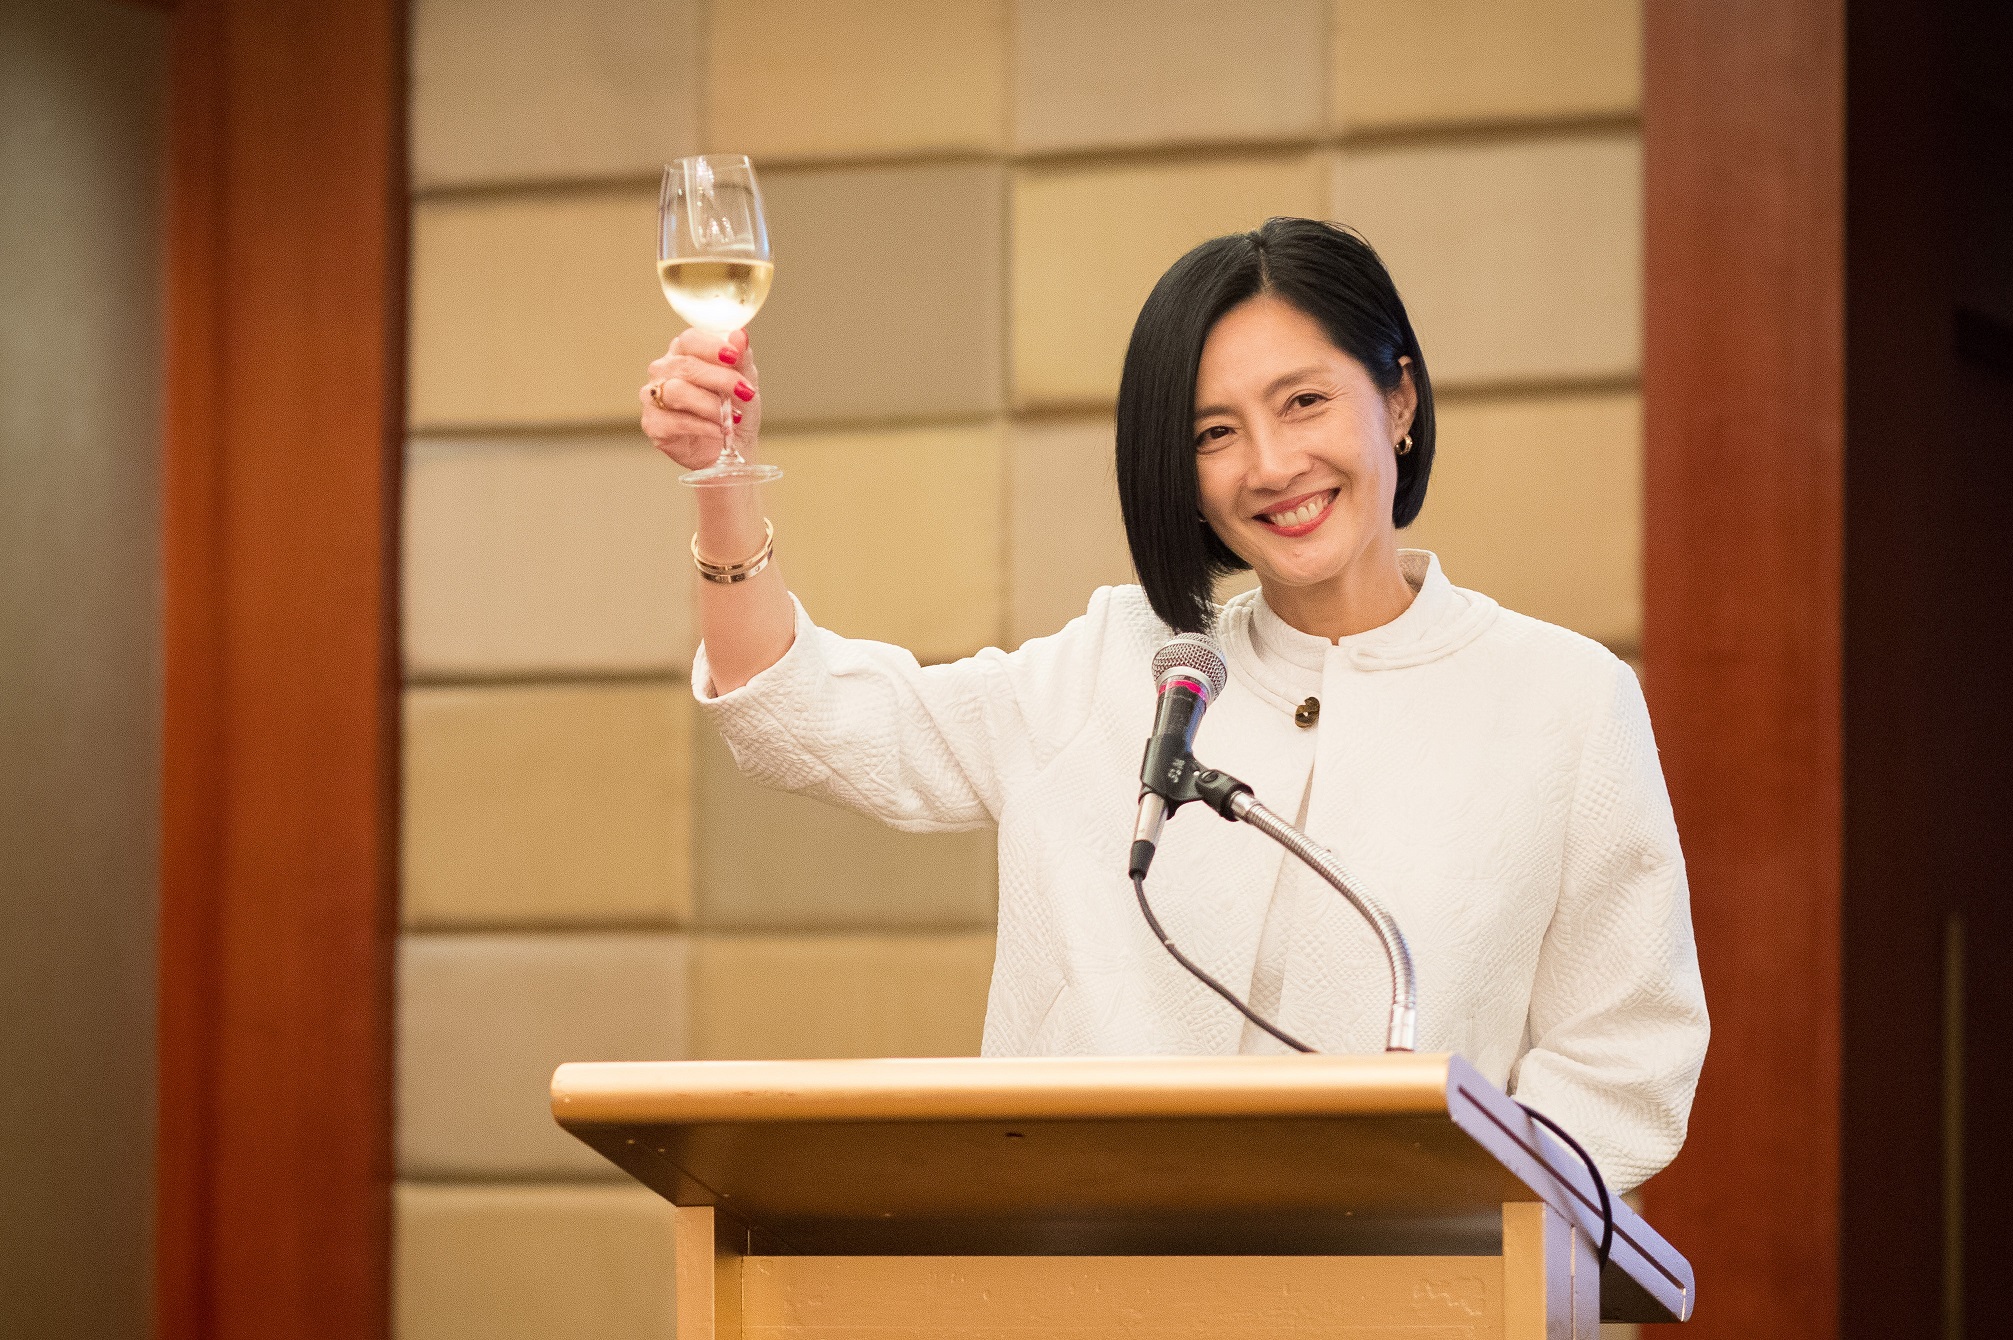 President and Dean Dr. Jikyeong Kang toasts the dinner guests